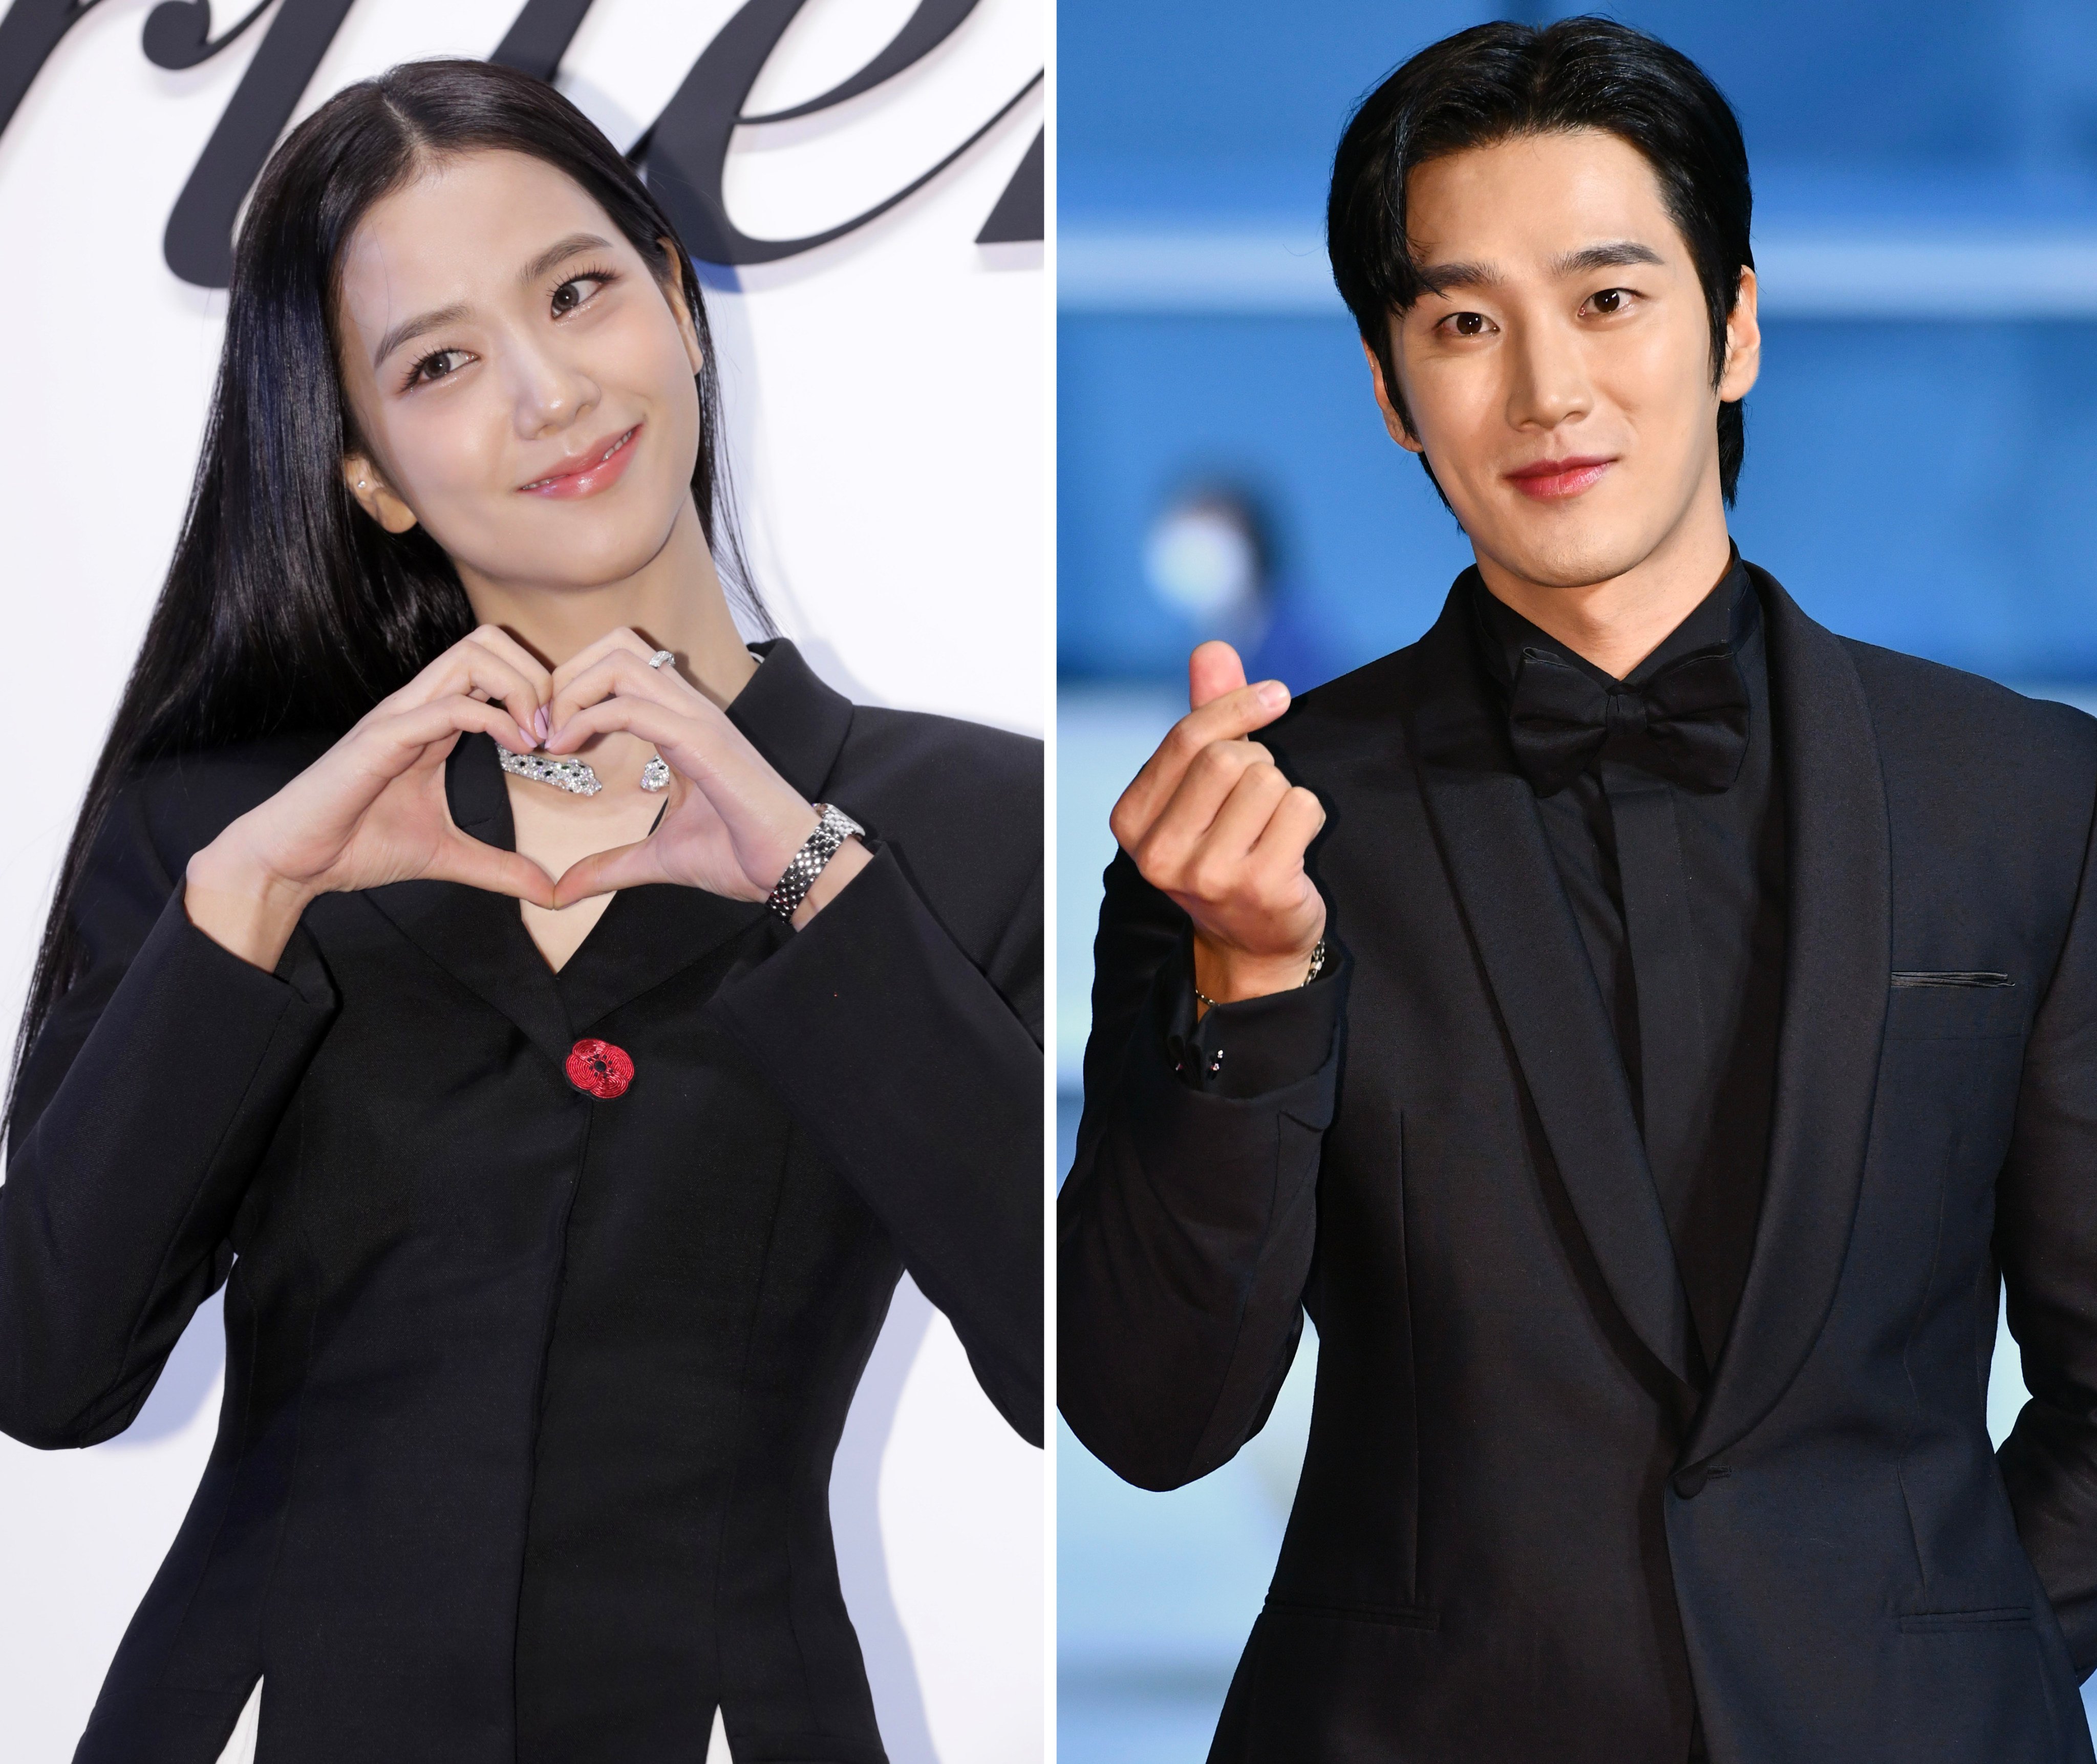 Jisoo of South Korean girl group Blackpink and actor Ahn Bo-Hyun are dating, and fans of the singer are divided over the relationship. Photo: Getty Images